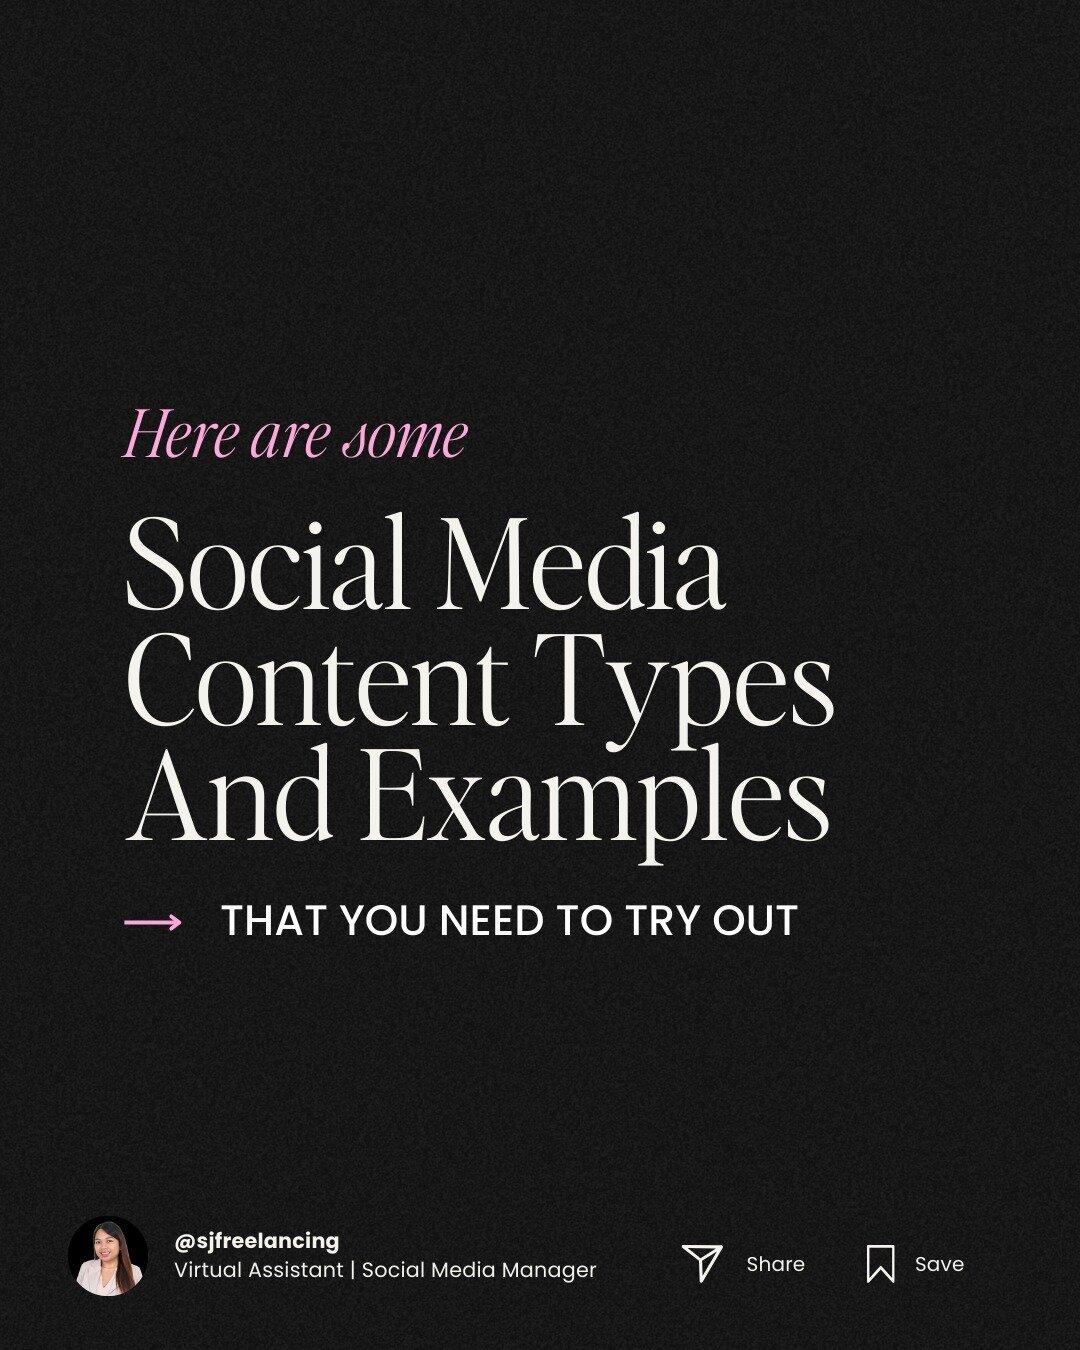 All right, SMM enthusiasts, it's content creation time! 📢 Let's explore the vibrant world of Social Media Content Types and Examples. 

Engaging Stories 🎥 Videos are where it's at! Create tutorials, behind-the-scenes glimpses, or entertaining clips